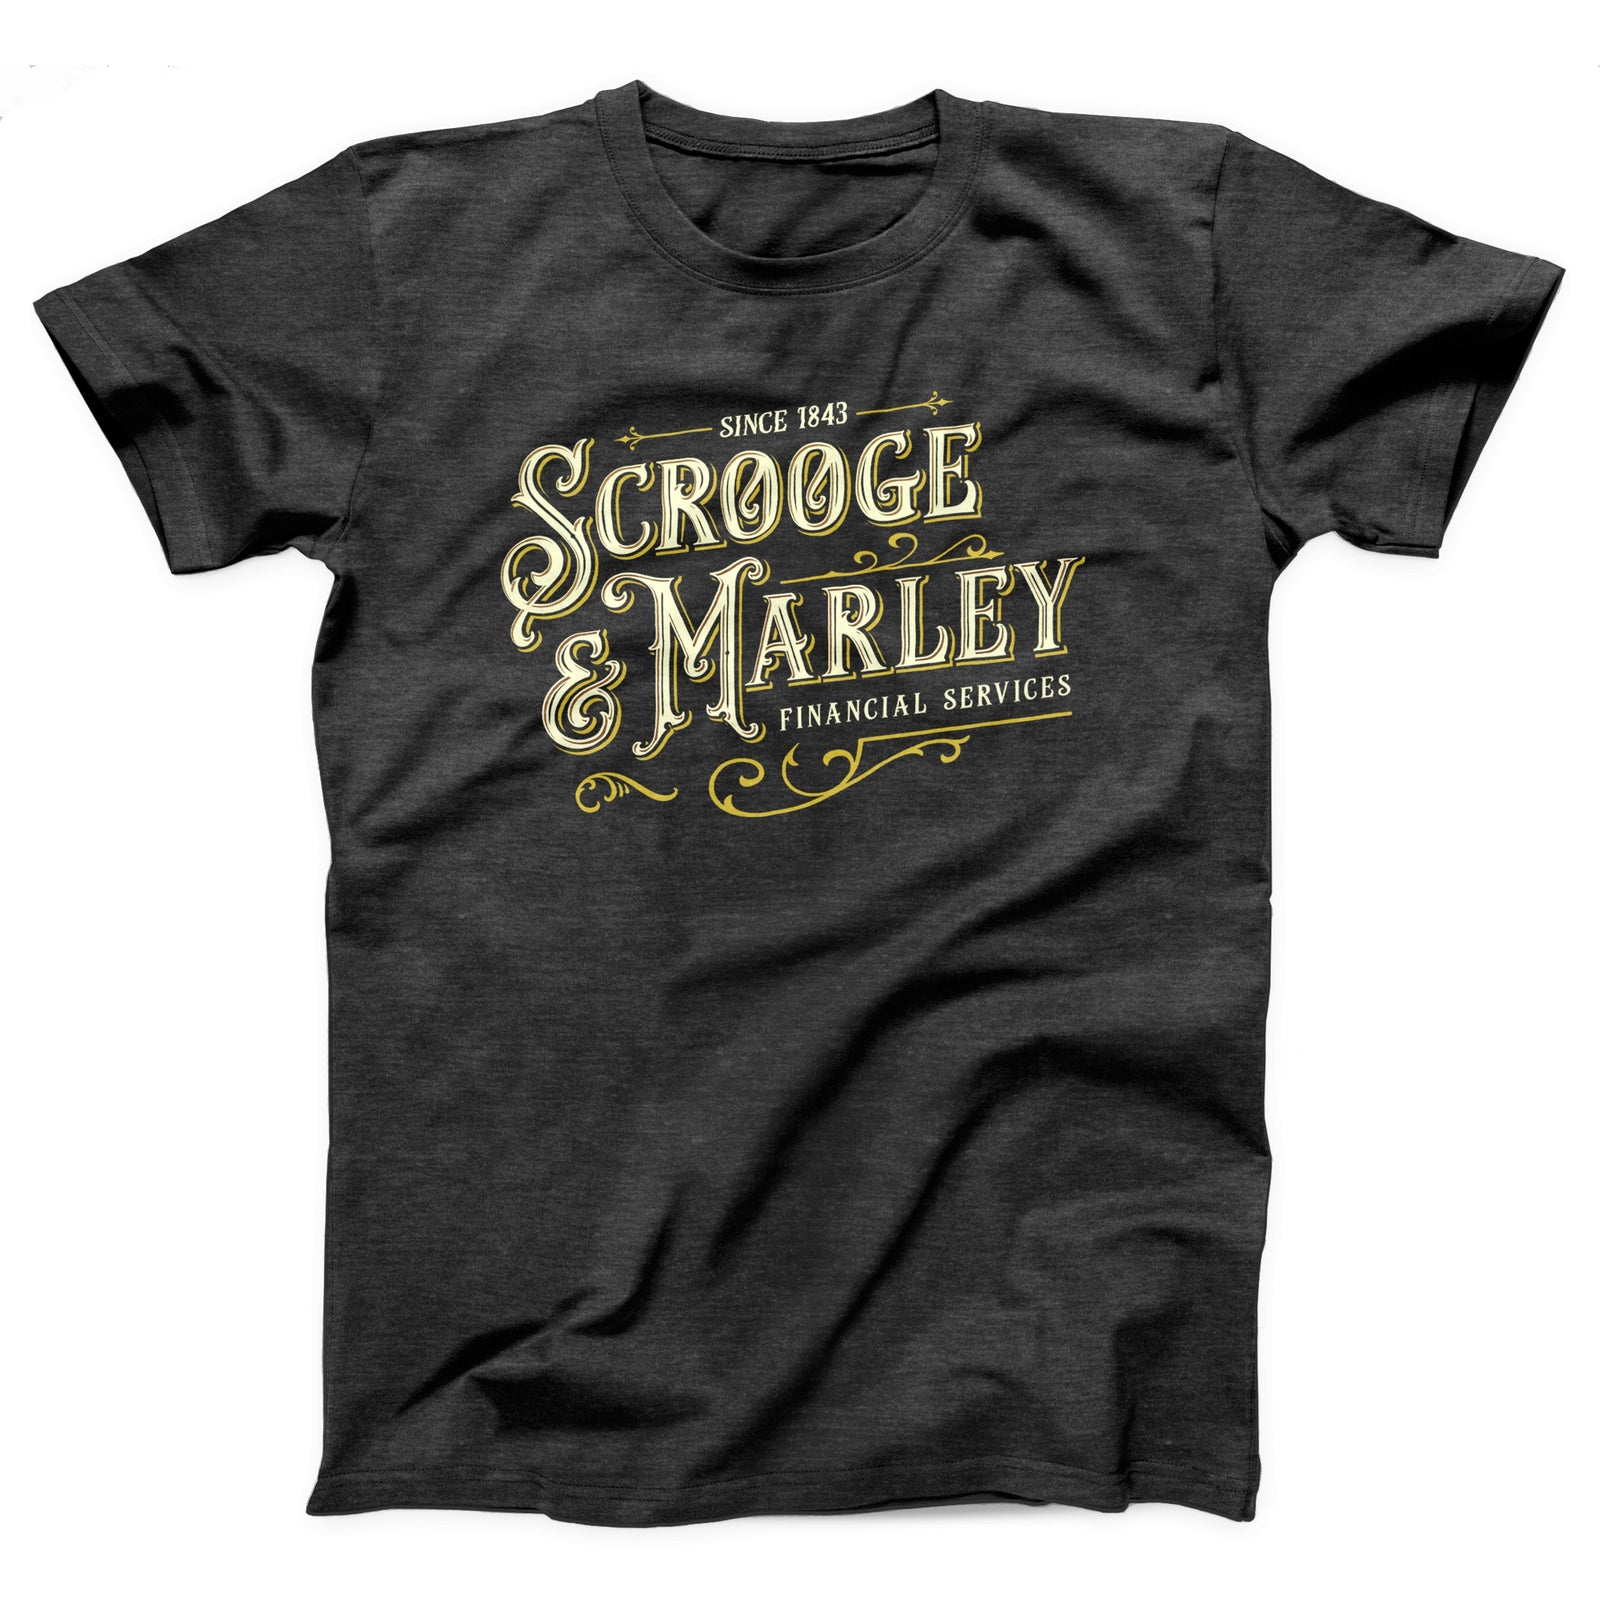 //cdn.shopify.com/s/files/1/0274/2488/2766/products/scrooge-marley-financial-services-adult-unisex-t-shirt-731653_5000x.jpg?v=1675243162 5000w,
    //cdn.shopify.com/s/files/1/0274/2488/2766/products/scrooge-marley-financial-services-adult-unisex-t-shirt-731653_4500x.jpg?v=1675243162 4500w,
    //cdn.shopify.com/s/files/1/0274/2488/2766/products/scrooge-marley-financial-services-adult-unisex-t-shirt-731653_4000x.jpg?v=1675243162 4000w,
    //cdn.shopify.com/s/files/1/0274/2488/2766/products/scrooge-marley-financial-services-adult-unisex-t-shirt-731653_3500x.jpg?v=1675243162 3500w,
    //cdn.shopify.com/s/files/1/0274/2488/2766/products/scrooge-marley-financial-services-adult-unisex-t-shirt-731653_3000x.jpg?v=1675243162 3000w,
    //cdn.shopify.com/s/files/1/0274/2488/2766/products/scrooge-marley-financial-services-adult-unisex-t-shirt-731653_2500x.jpg?v=1675243162 2500w,
    //cdn.shopify.com/s/files/1/0274/2488/2766/products/scrooge-marley-financial-services-adult-unisex-t-shirt-731653_2000x.jpg?v=1675243162 2000w,
    //cdn.shopify.com/s/files/1/0274/2488/2766/products/scrooge-marley-financial-services-adult-unisex-t-shirt-731653_1800x.jpg?v=1675243162 1800w,
    //cdn.shopify.com/s/files/1/0274/2488/2766/products/scrooge-marley-financial-services-adult-unisex-t-shirt-731653_1600x.jpg?v=1675243162 1600w,
    //cdn.shopify.com/s/files/1/0274/2488/2766/products/scrooge-marley-financial-services-adult-unisex-t-shirt-731653_1400x.jpg?v=1675243162 1400w,
    //cdn.shopify.com/s/files/1/0274/2488/2766/products/scrooge-marley-financial-services-adult-unisex-t-shirt-731653_1200x.jpg?v=1675243162 1200w,
    //cdn.shopify.com/s/files/1/0274/2488/2766/products/scrooge-marley-financial-services-adult-unisex-t-shirt-731653_1000x.jpg?v=1675243162 1000w,
    //cdn.shopify.com/s/files/1/0274/2488/2766/products/scrooge-marley-financial-services-adult-unisex-t-shirt-731653_800x.jpg?v=1675243162 800w,
    //cdn.shopify.com/s/files/1/0274/2488/2766/products/scrooge-marley-financial-services-adult-unisex-t-shirt-731653_600x.jpg?v=1675243162 600w,
    //cdn.shopify.com/s/files/1/0274/2488/2766/products/scrooge-marley-financial-services-adult-unisex-t-shirt-731653_400x.jpg?v=1675243162 400w,
    //cdn.shopify.com/s/files/1/0274/2488/2766/products/scrooge-marley-financial-services-adult-unisex-t-shirt-731653_200x.jpg?v=1675243162 200w